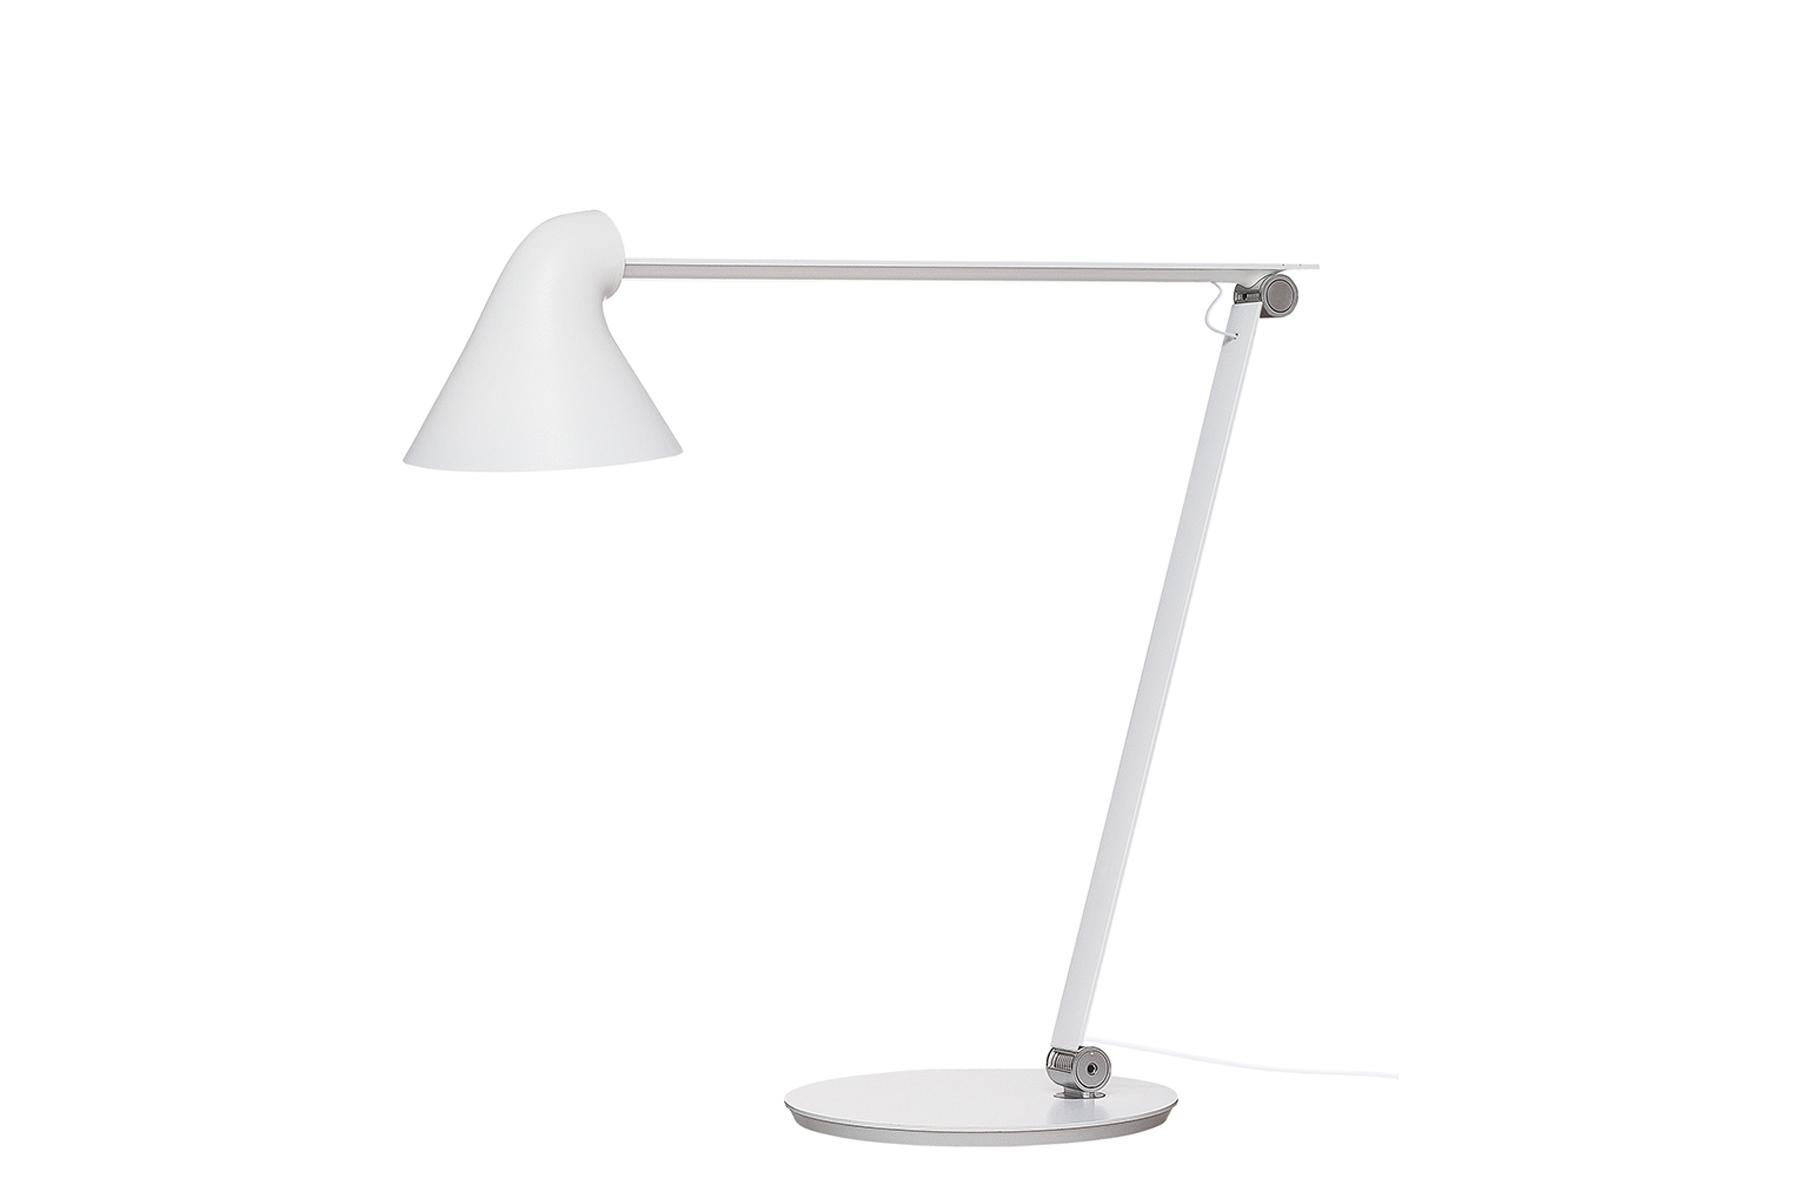 The fixture provides direct glare-free horizontal light while reflecting some of the light through the rear of the head, illuminating the top of the arm. The ergonomic design of the fixture head shapes the light and gives optimal light direction. A